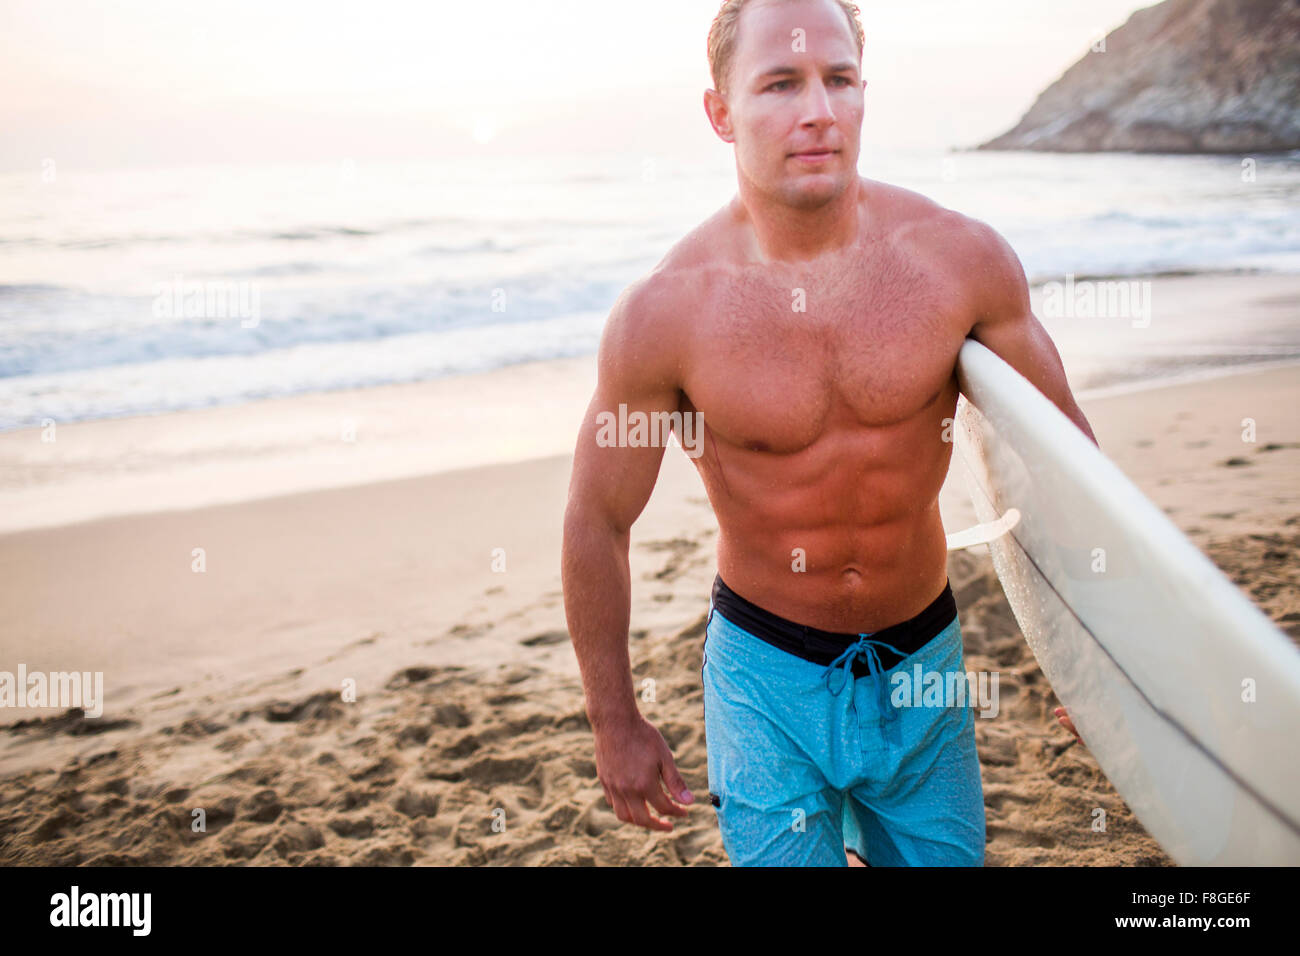 Caucasian surfer carrying surfboard on beach Banque D'Images